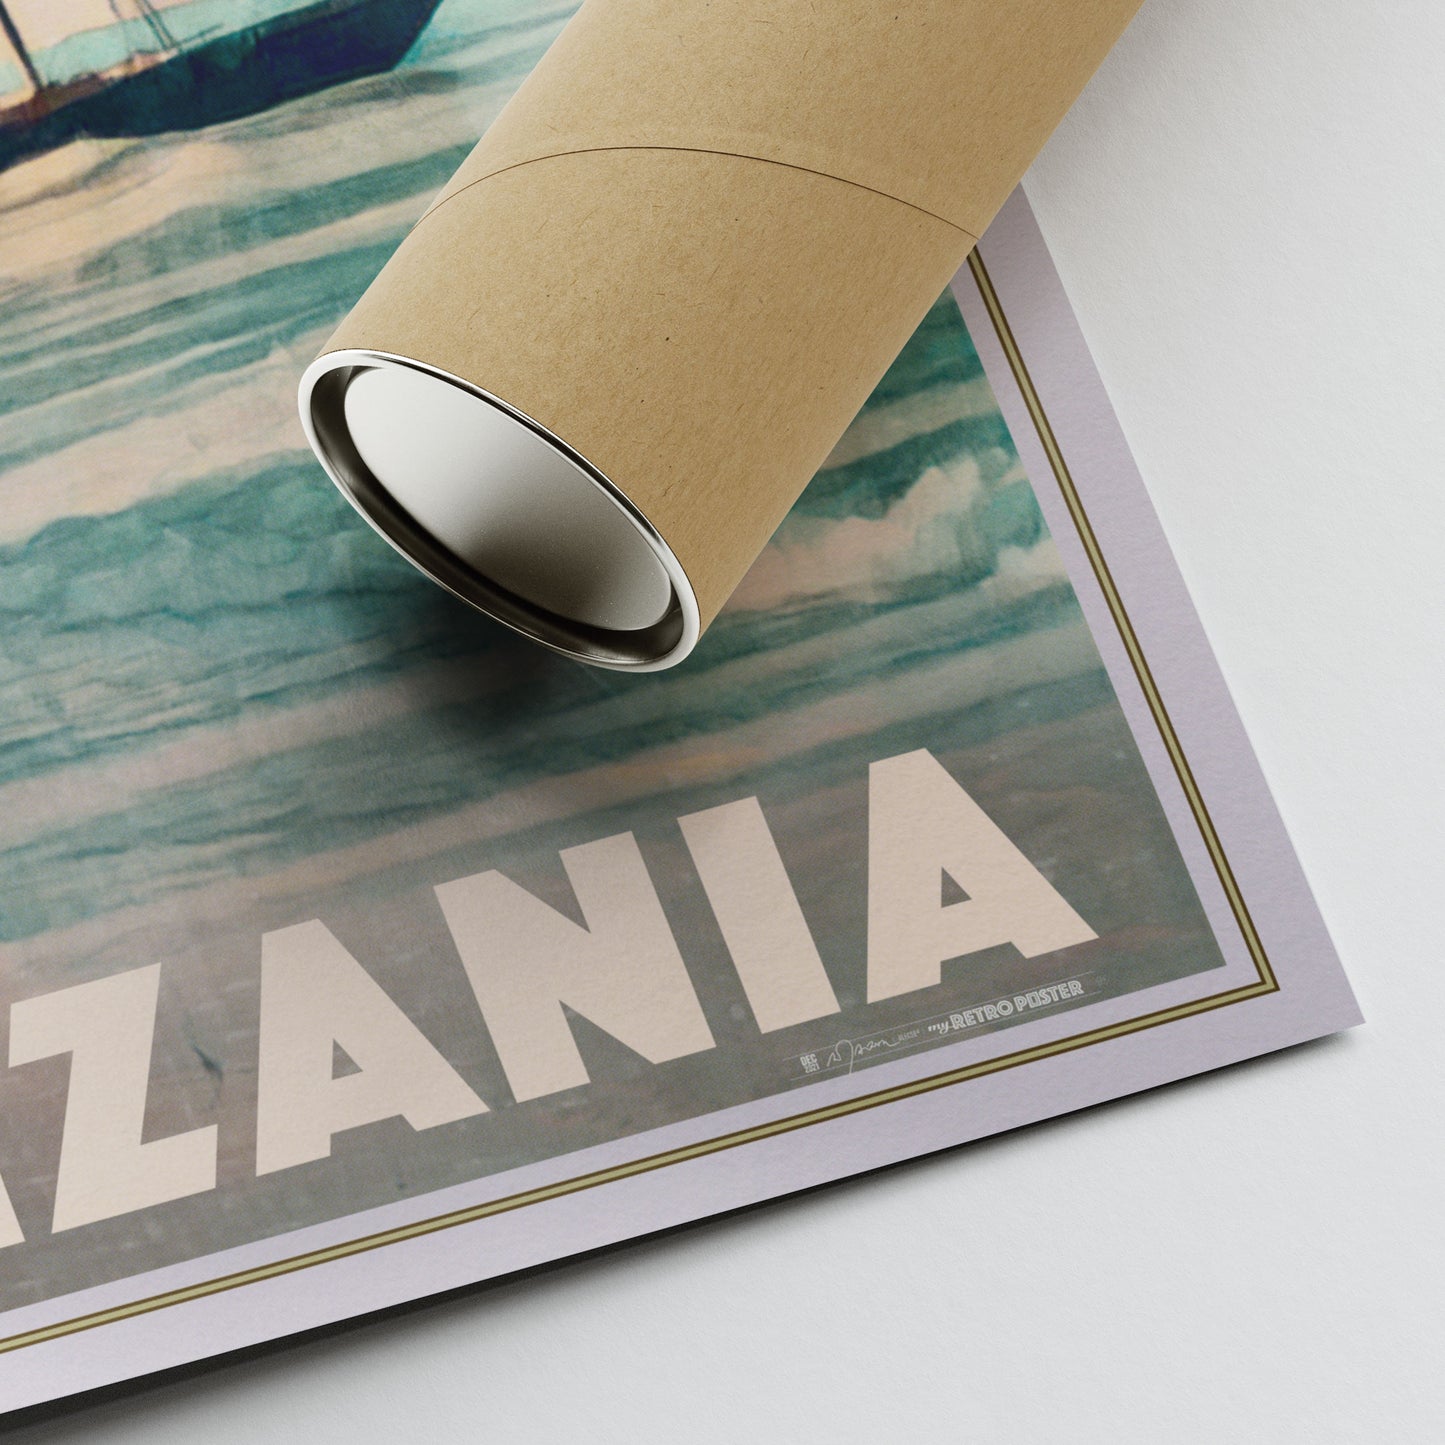 Lower right corner of the Zanzibar travel poster with Alecse's signature and a shipping tube